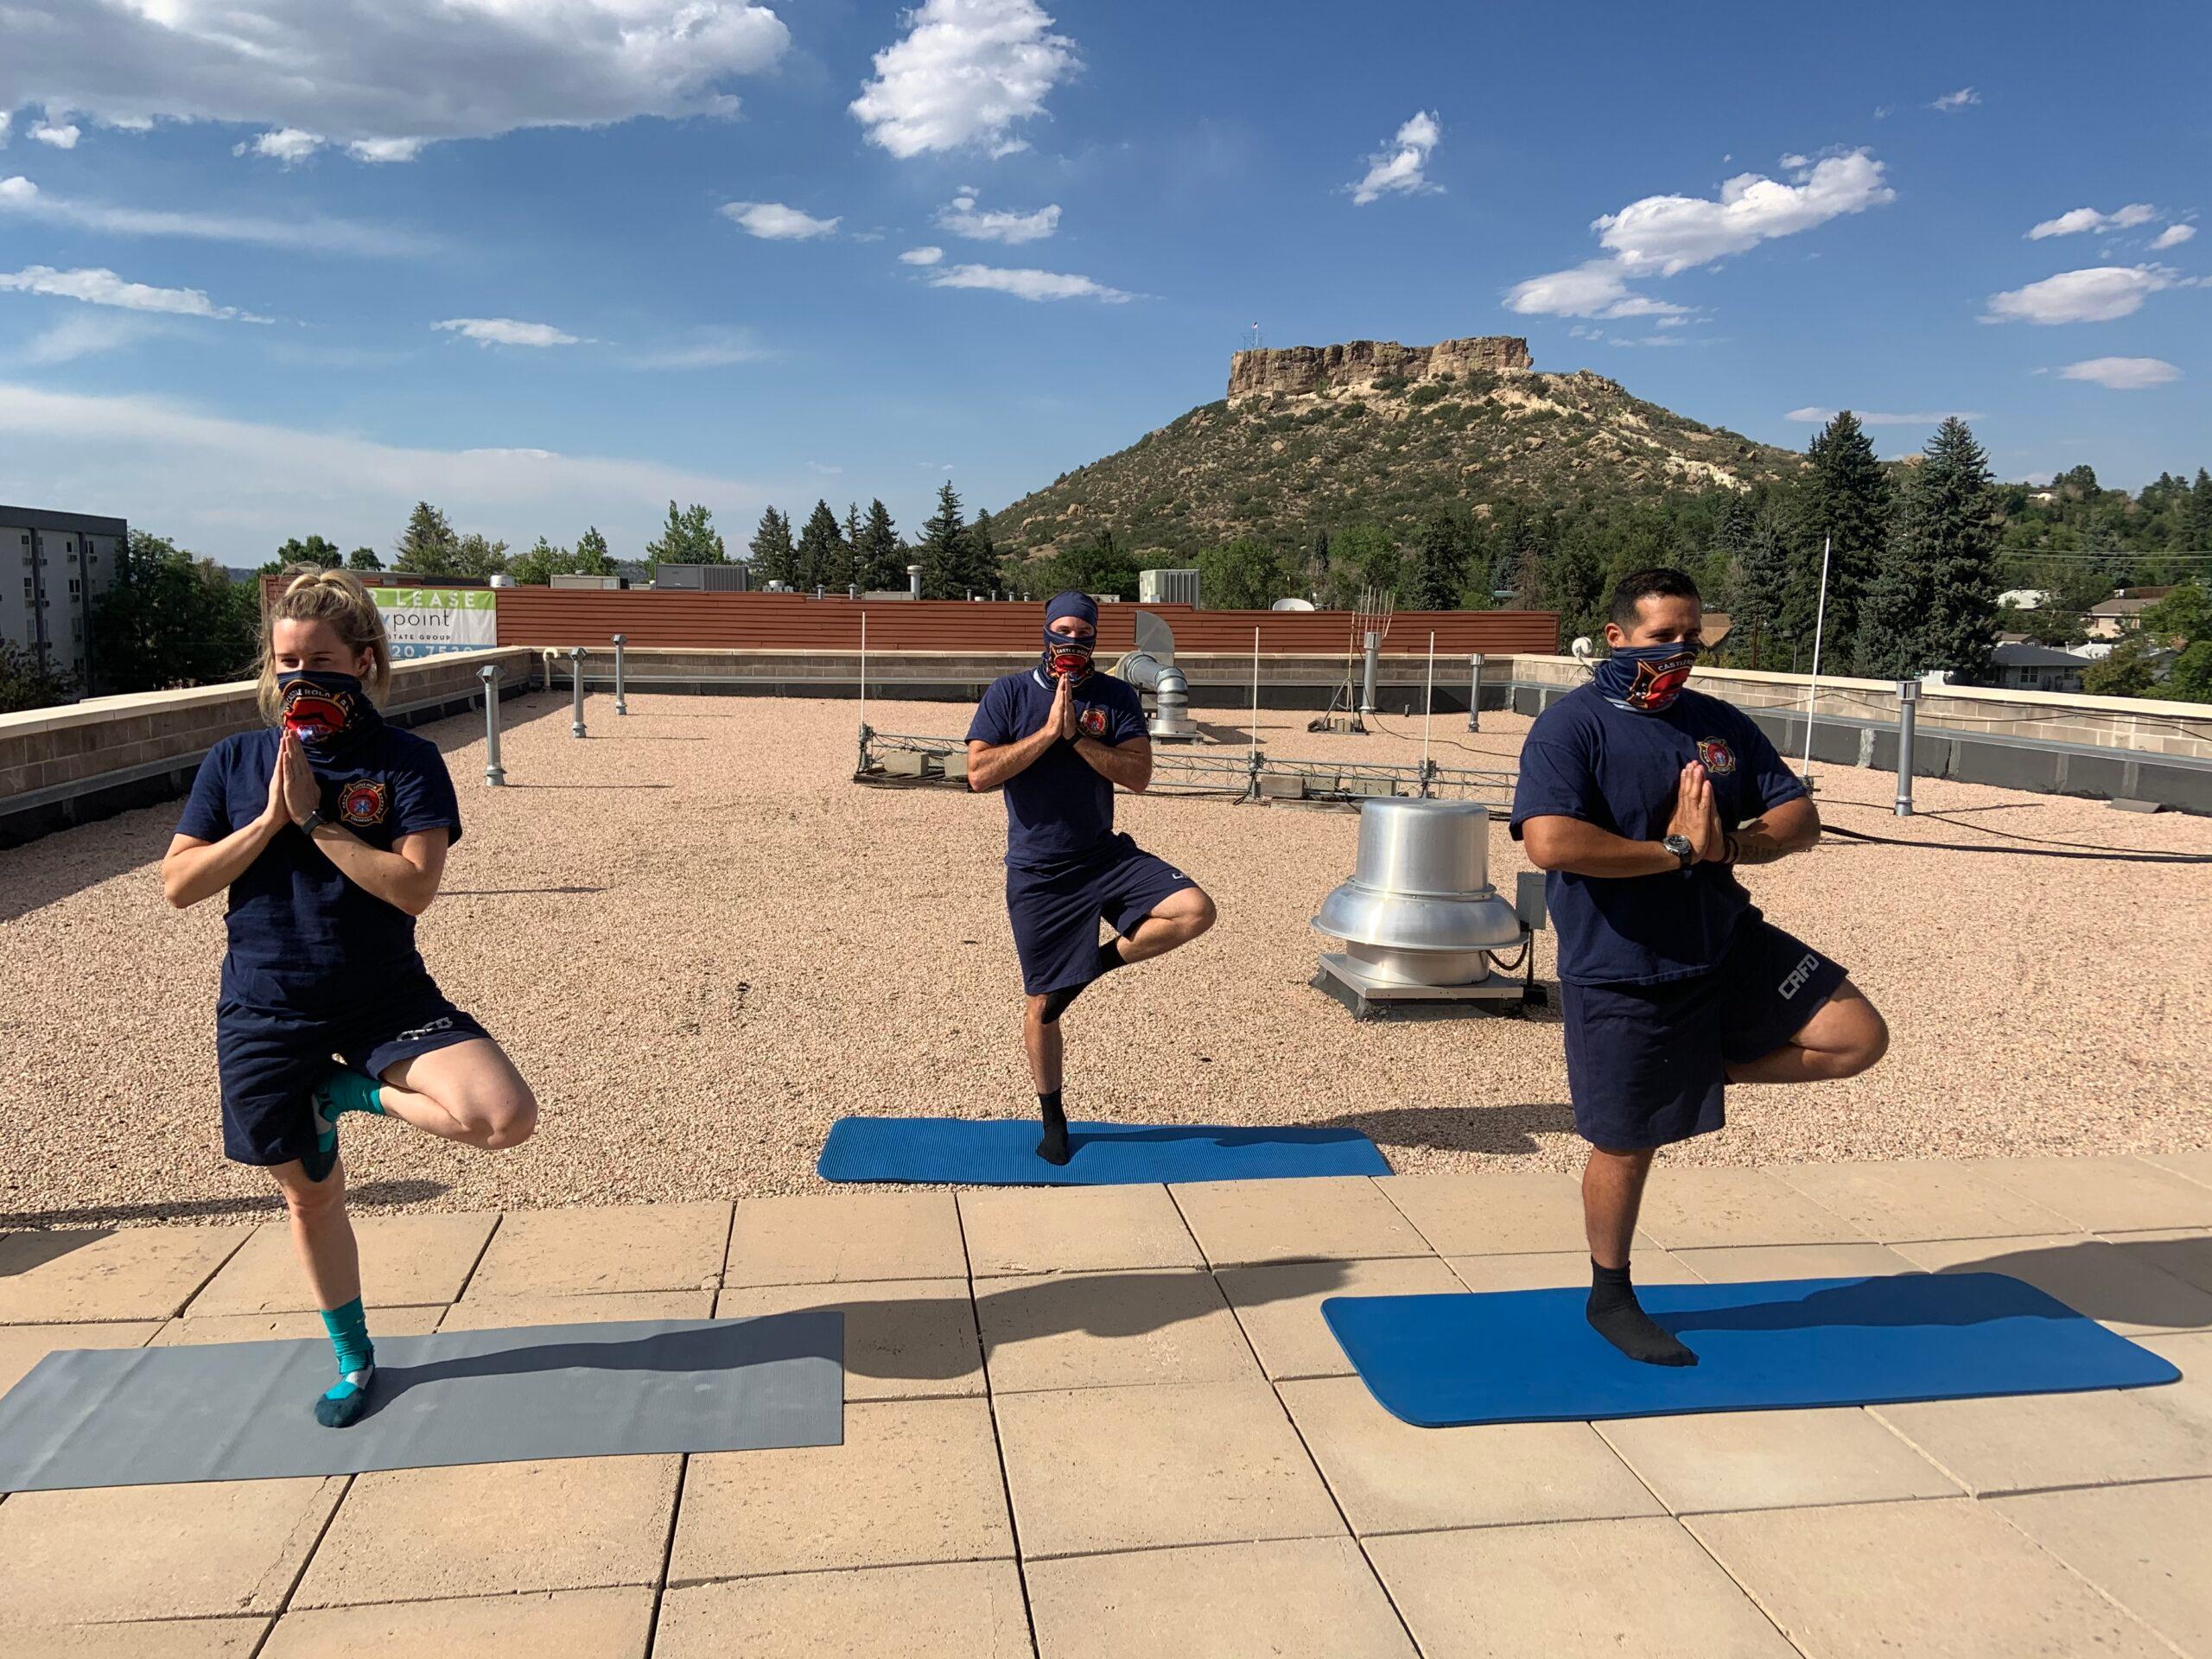 Three firefighters pose on a roof, doing yoga on blue yoga mats in masks.